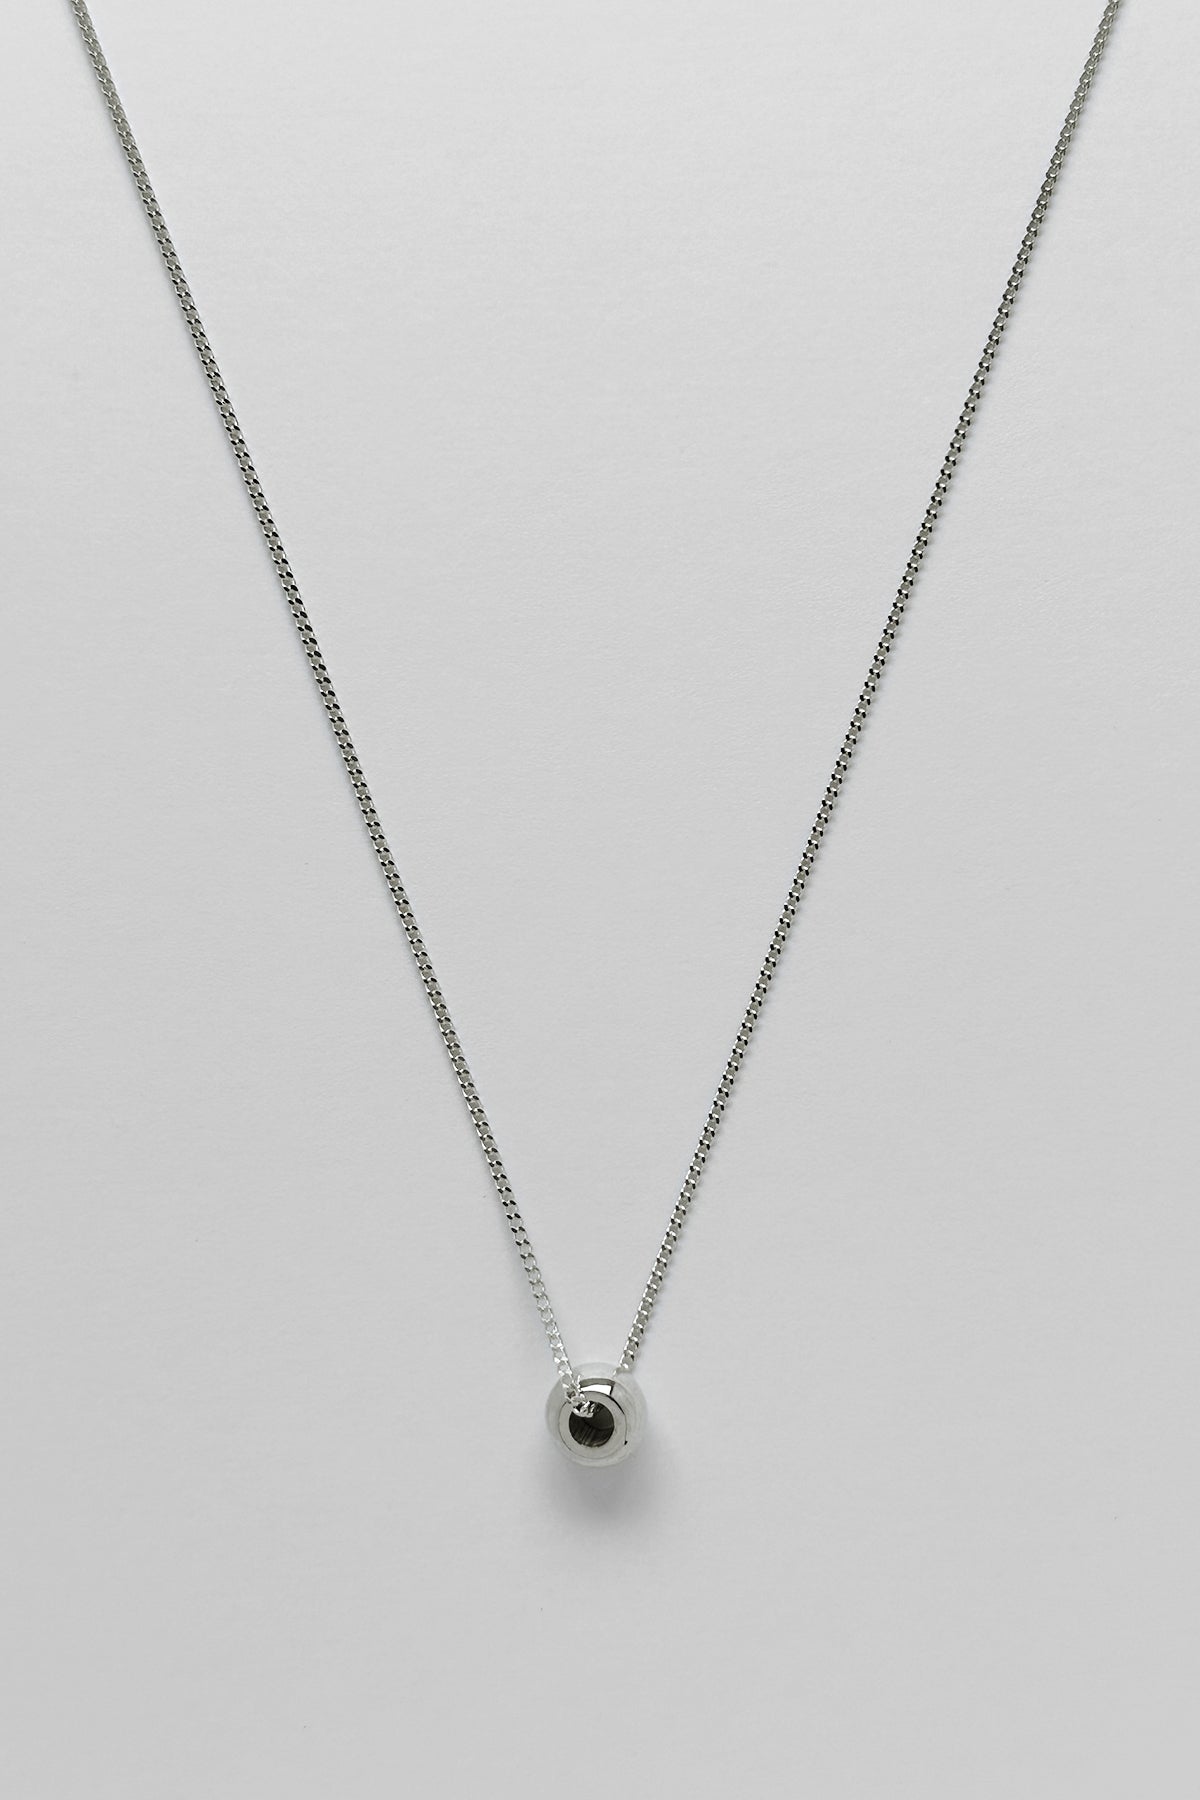 Petite Ring Pendant Silver Necklace